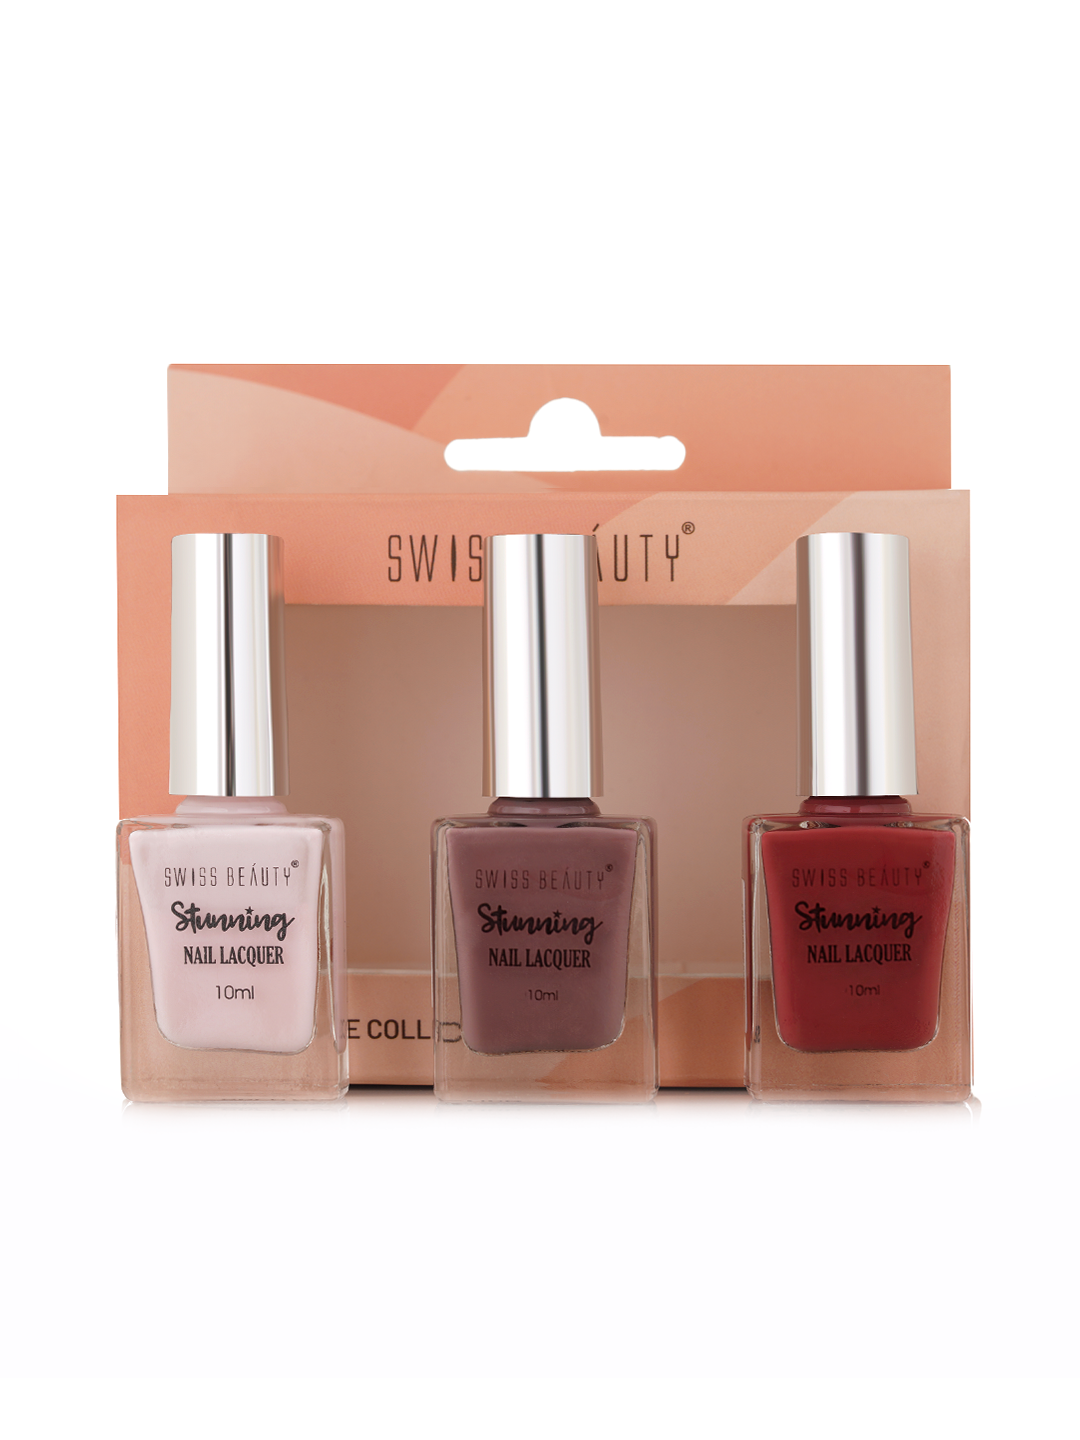 GIFTY Nail Polish Set 8ml each High Gloss Nail Paint Superstay at Wholesale  Price Brown, Pink, Light Pink, Yellow, Blue, Light Blue, Sky Blue, Dark  Green, Red etc - Price in India,